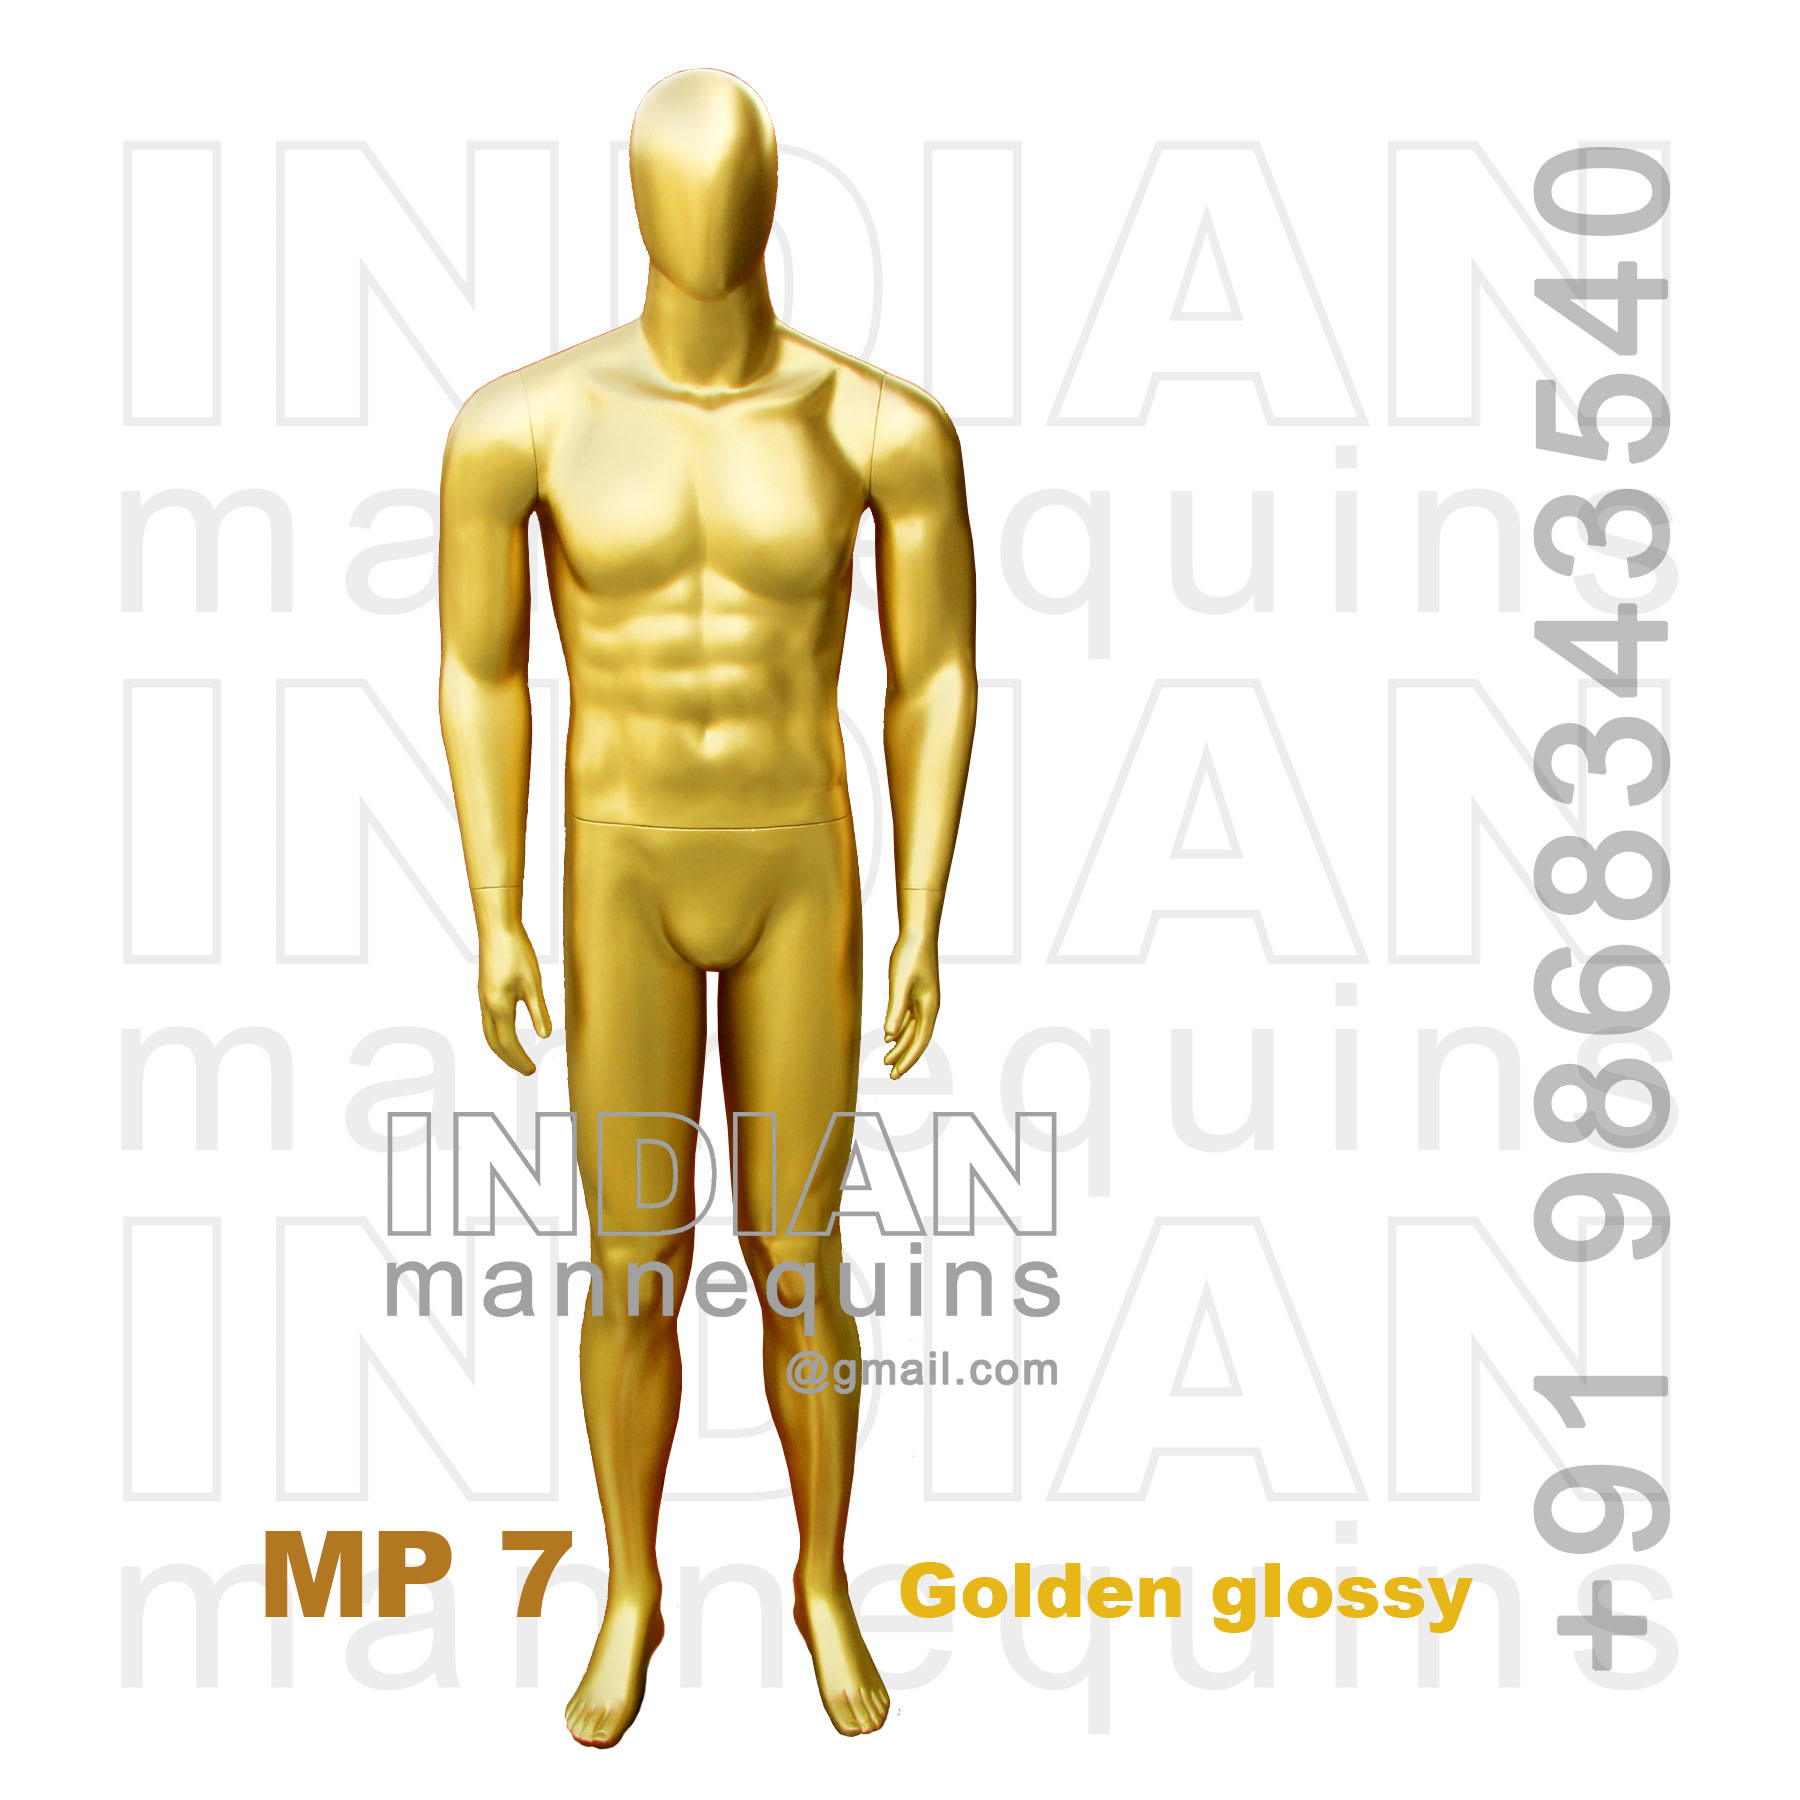 Male Mannequins - Mannequins Human Look Manufacturer from New Delhi